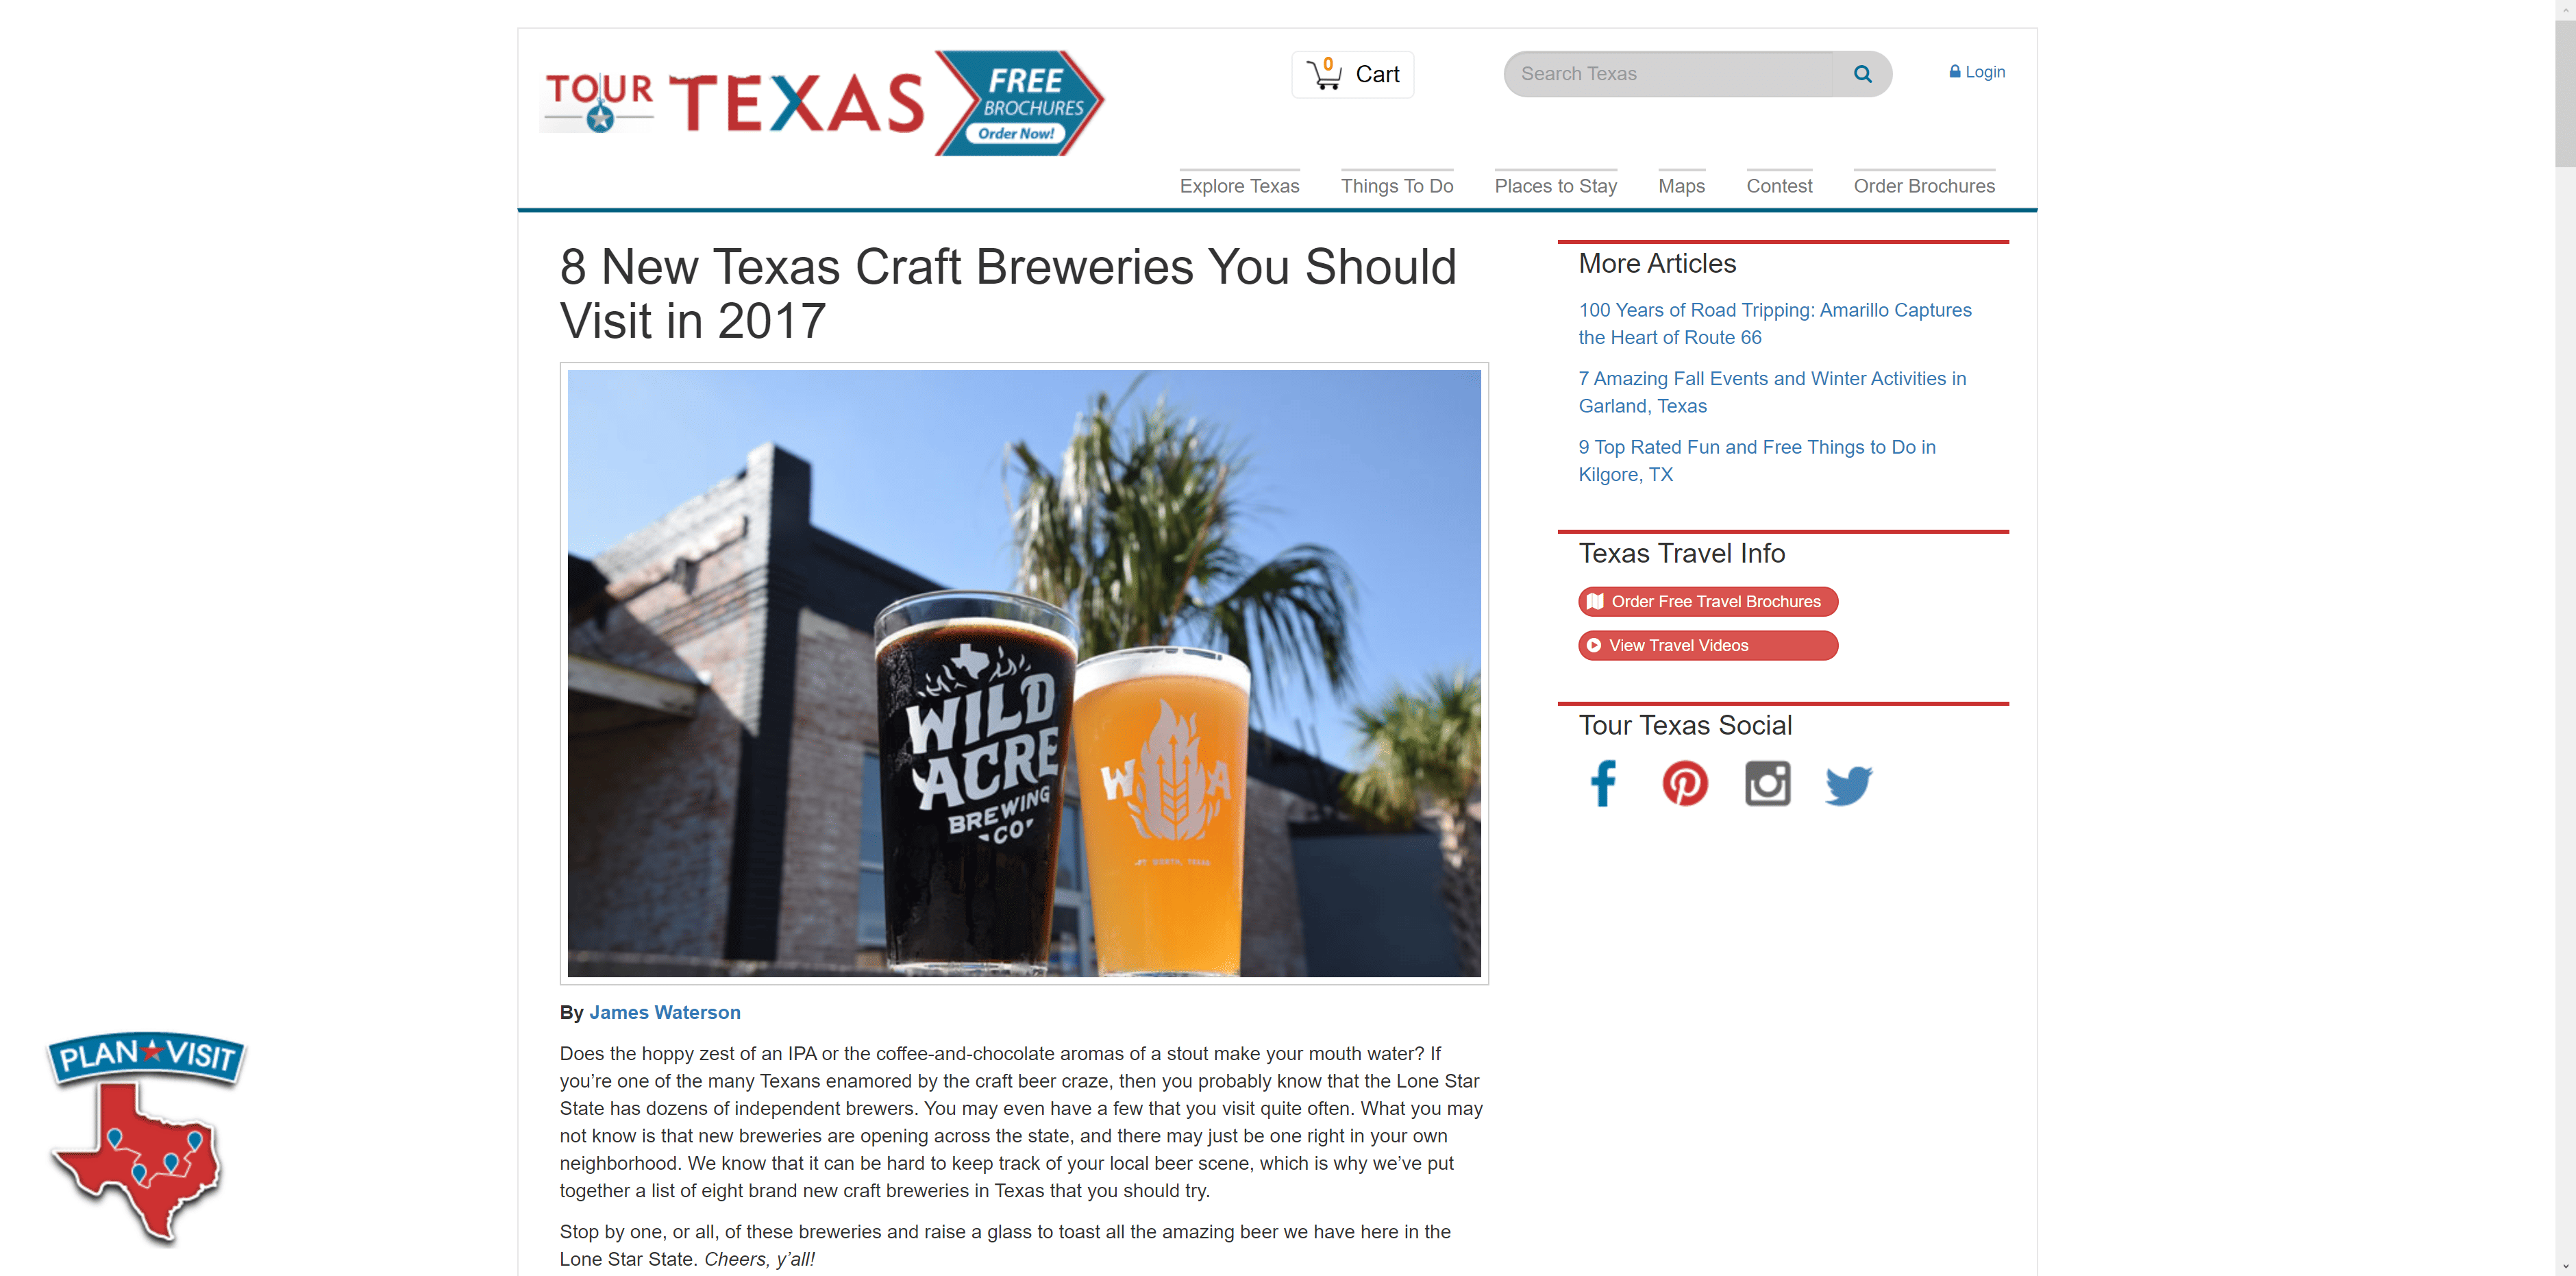 8 new Texas breweries to visit in 2017 in Tour Texas